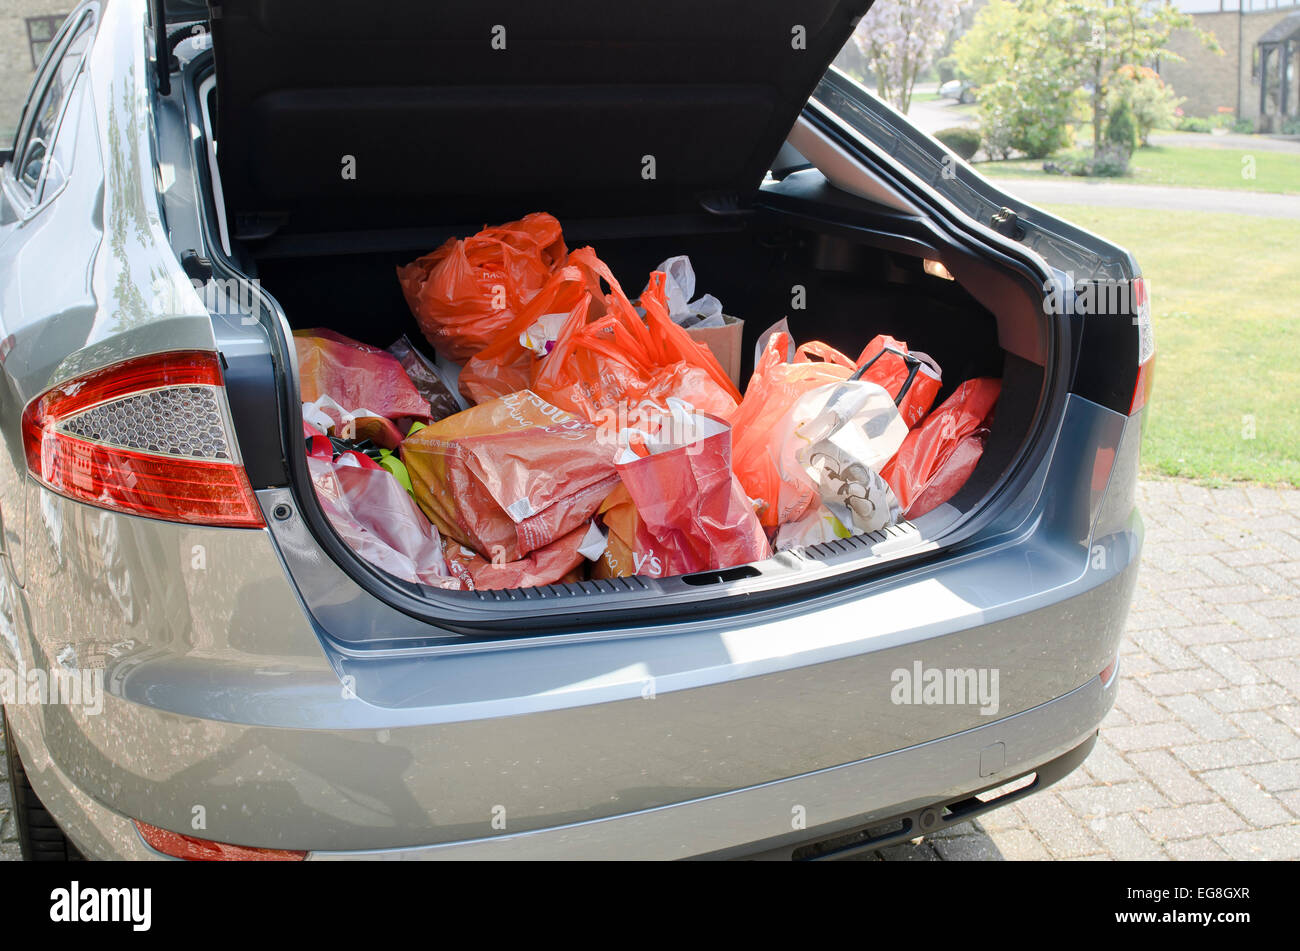 car boot / trunk full of grocery shopping Stock Photo